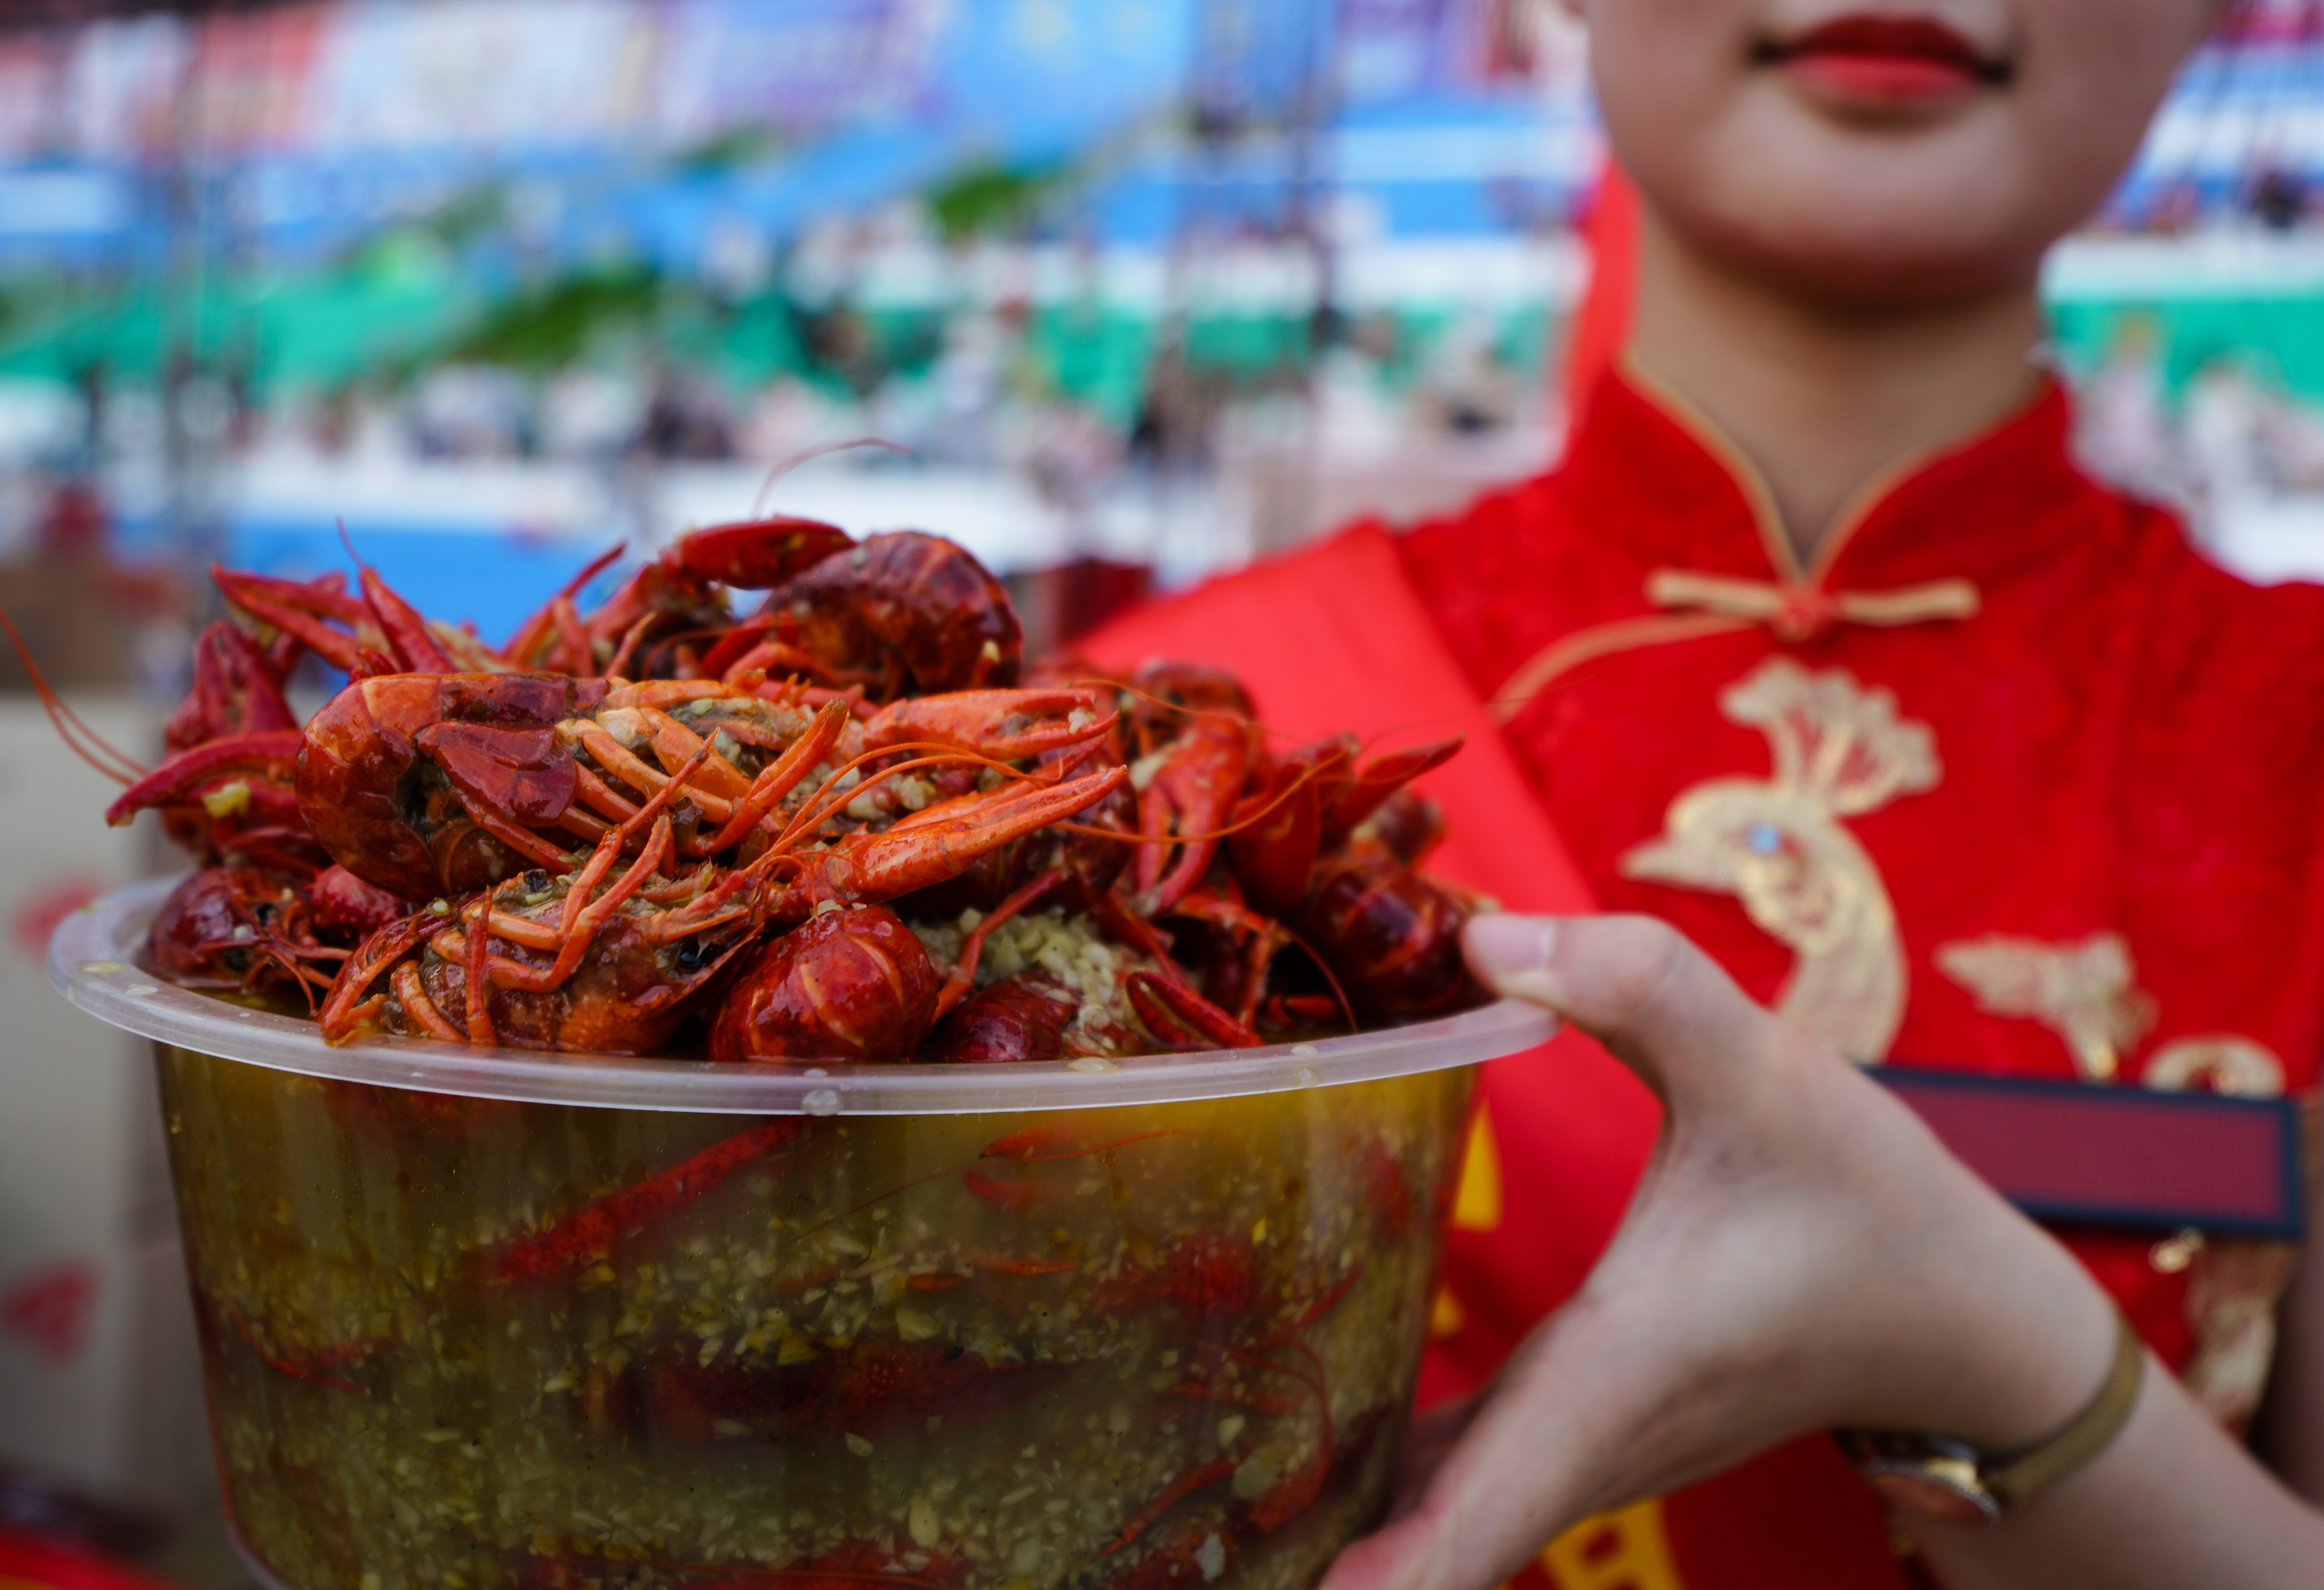 A trainload of crayfish was sent from China to Russia for World Cup fans to enjoy.